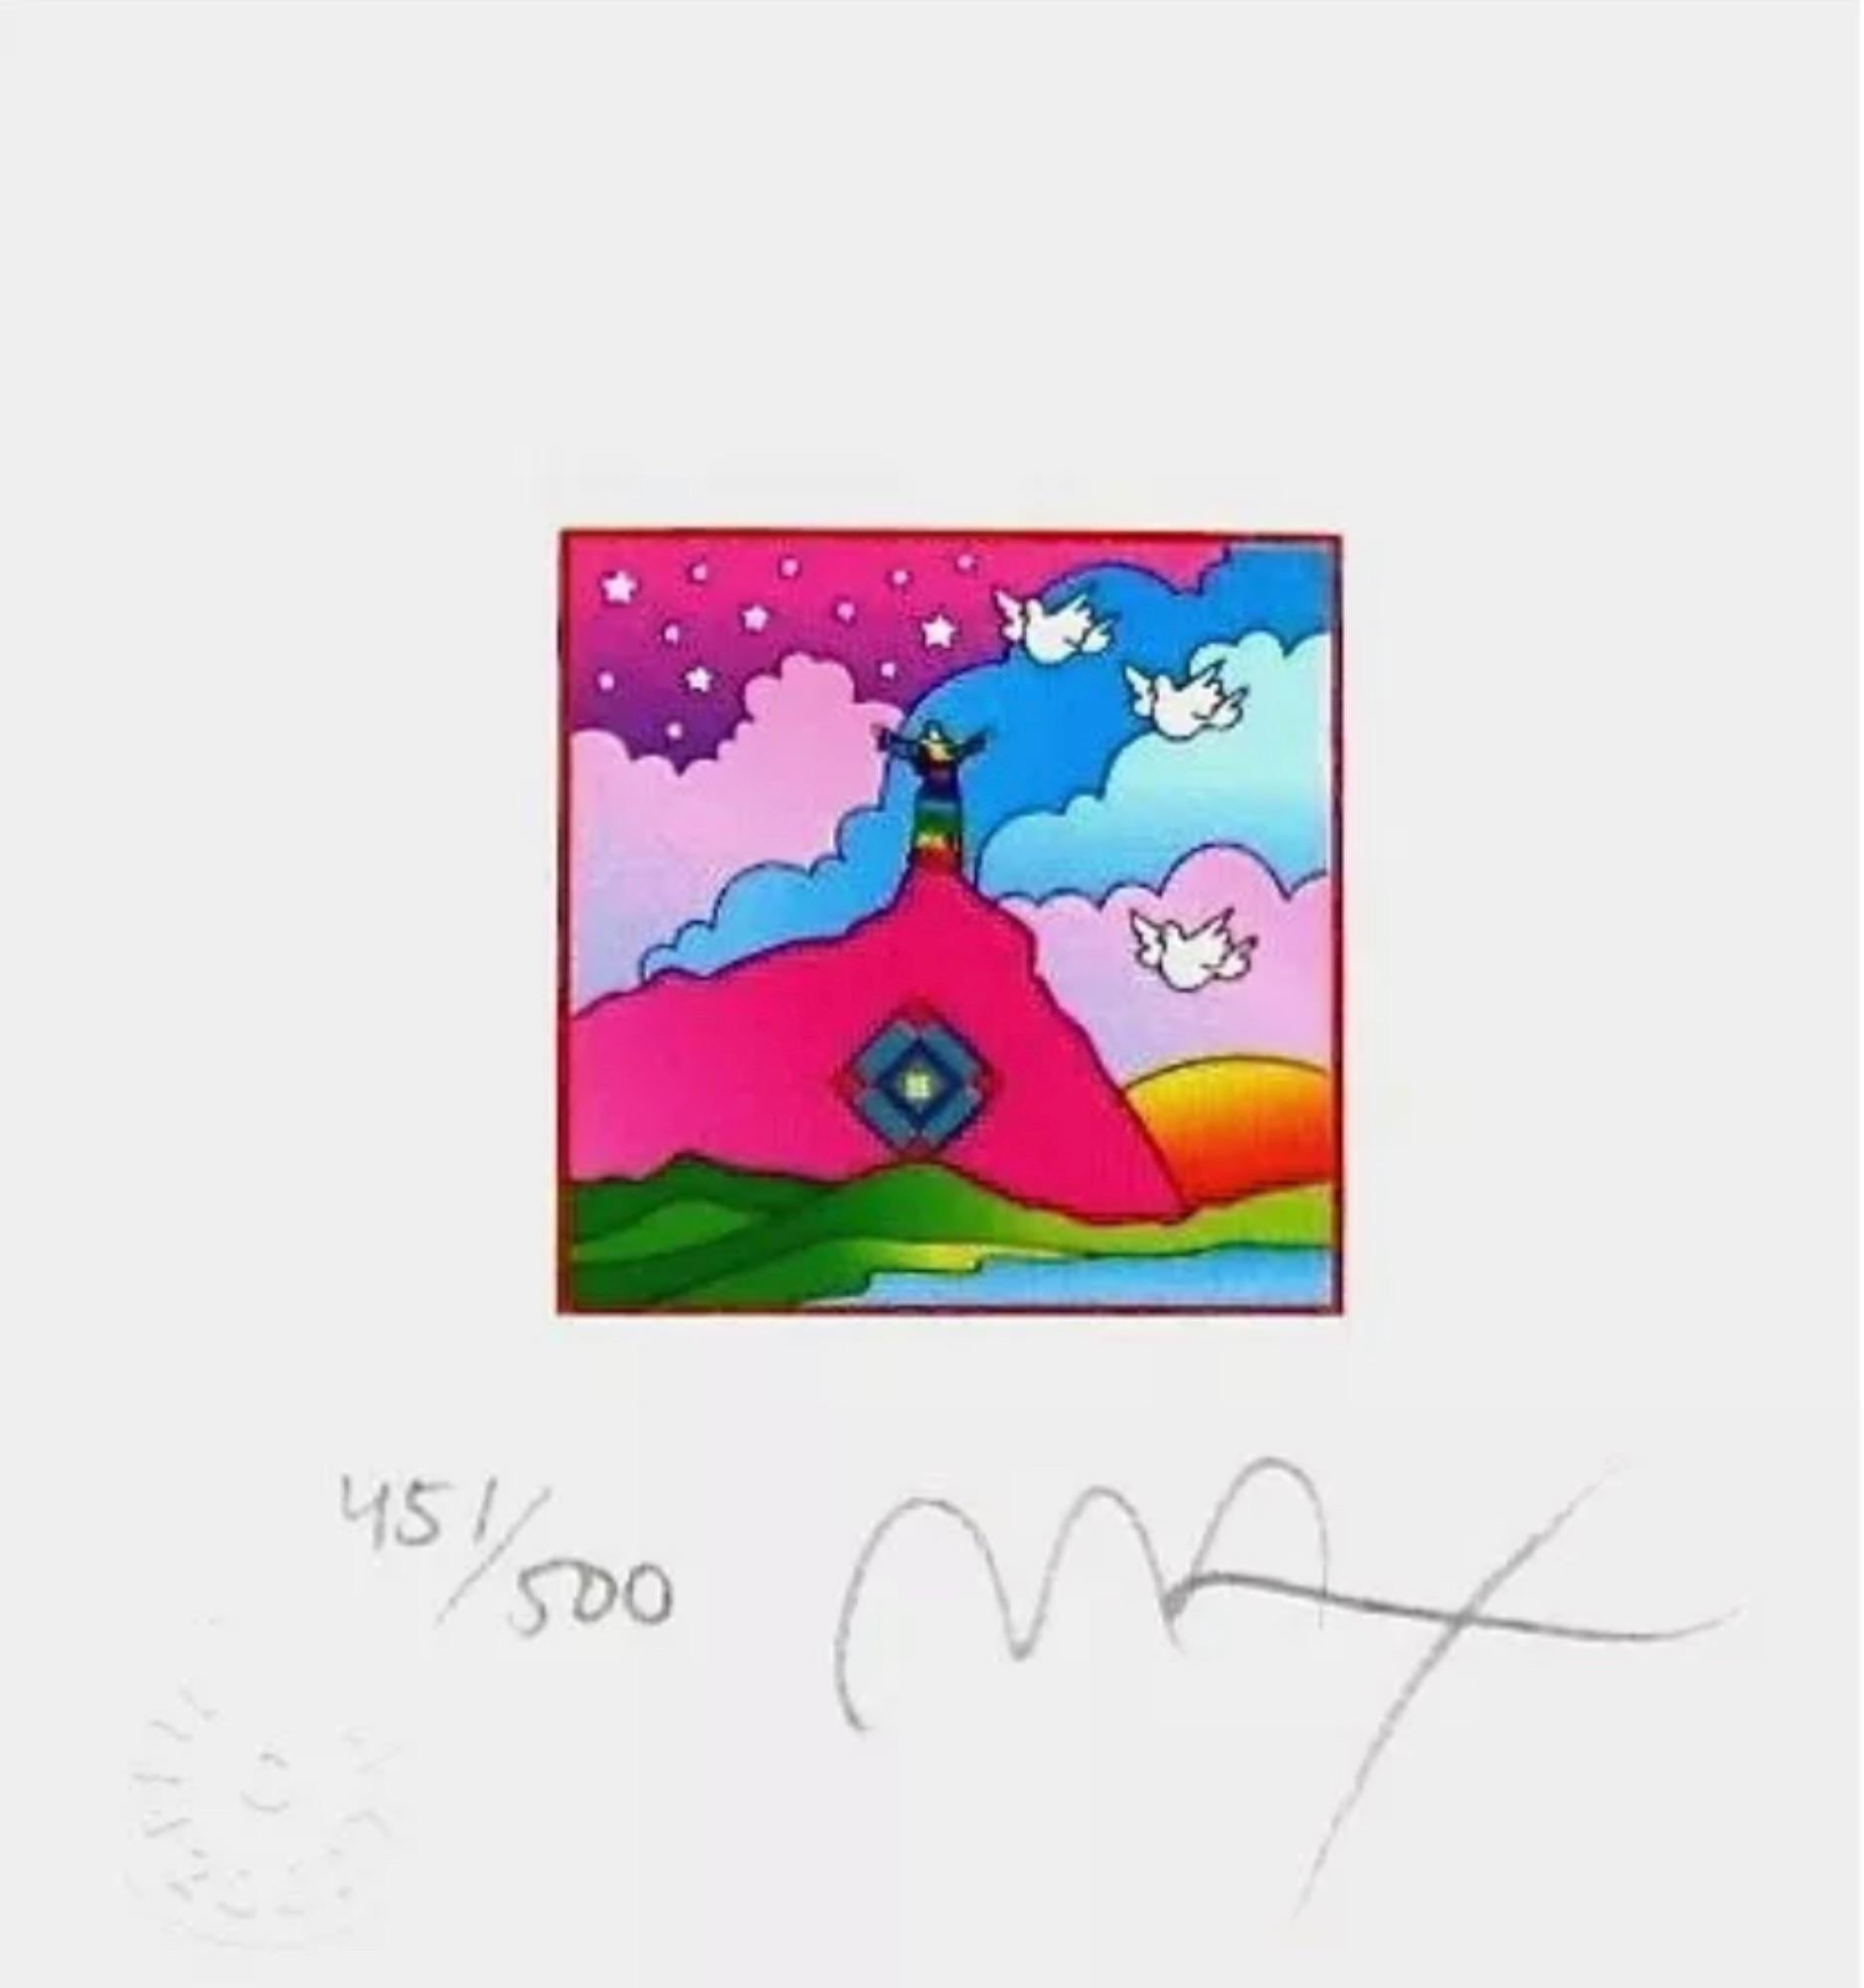 Artist: Peter Max (1937)
Title: Sage on Mountain
Year: 2002
Edition: 451/500, plus proofs
Medium: Lithograph on Lustro Saxony paper
Size: 4.87 x 4.5 inches
Condition: Excellent
Inscription: Signed and numbered by the artist.
Notes: Published by Via